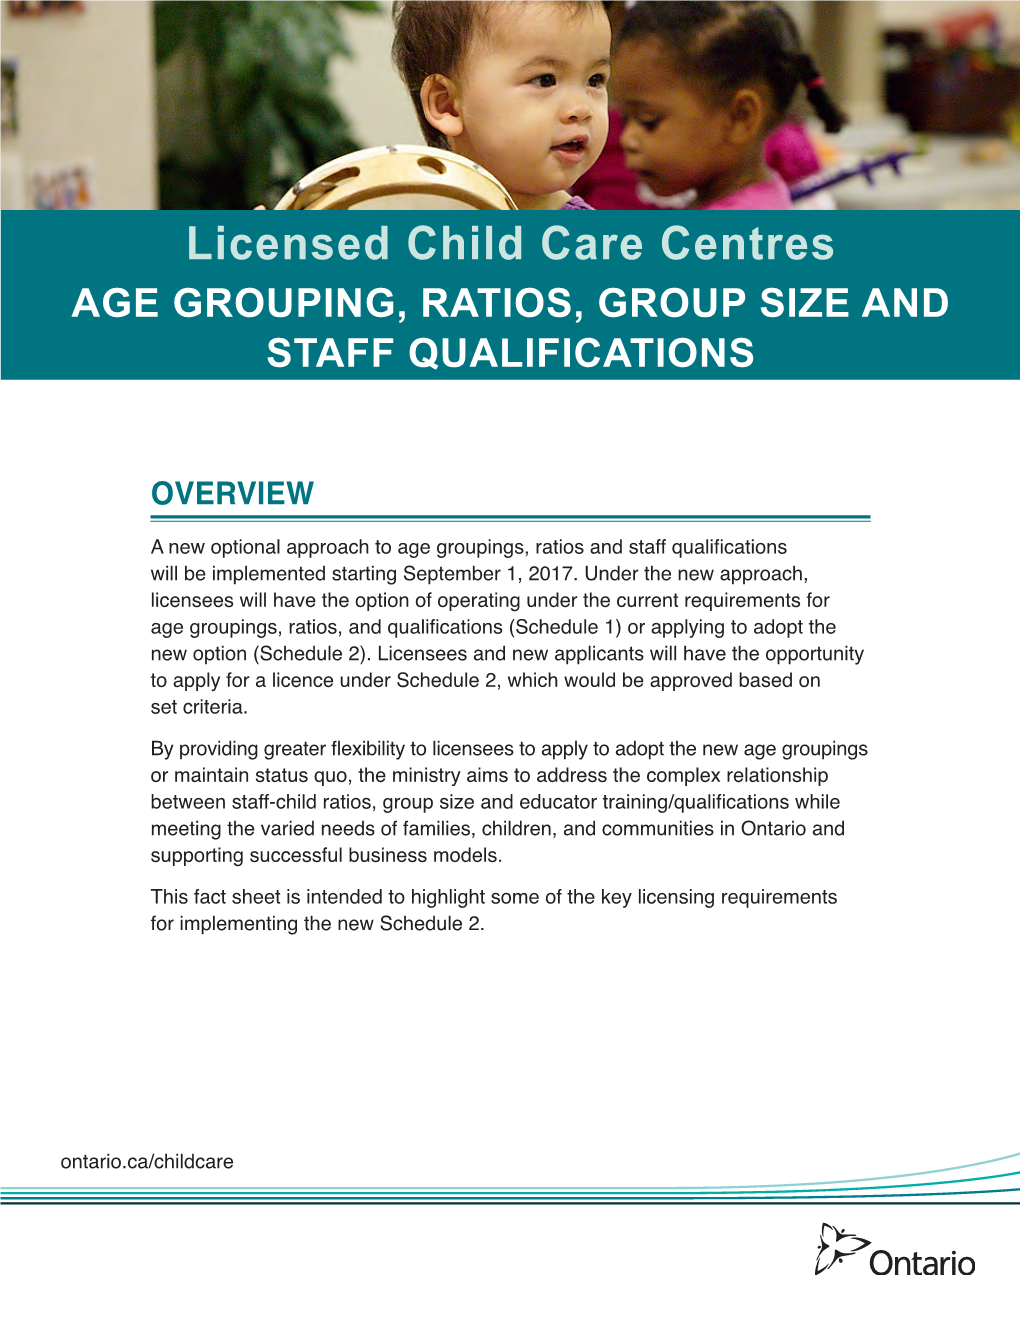 Licensed Child Care Centres – Age Grouping, Ratios, Group Size And